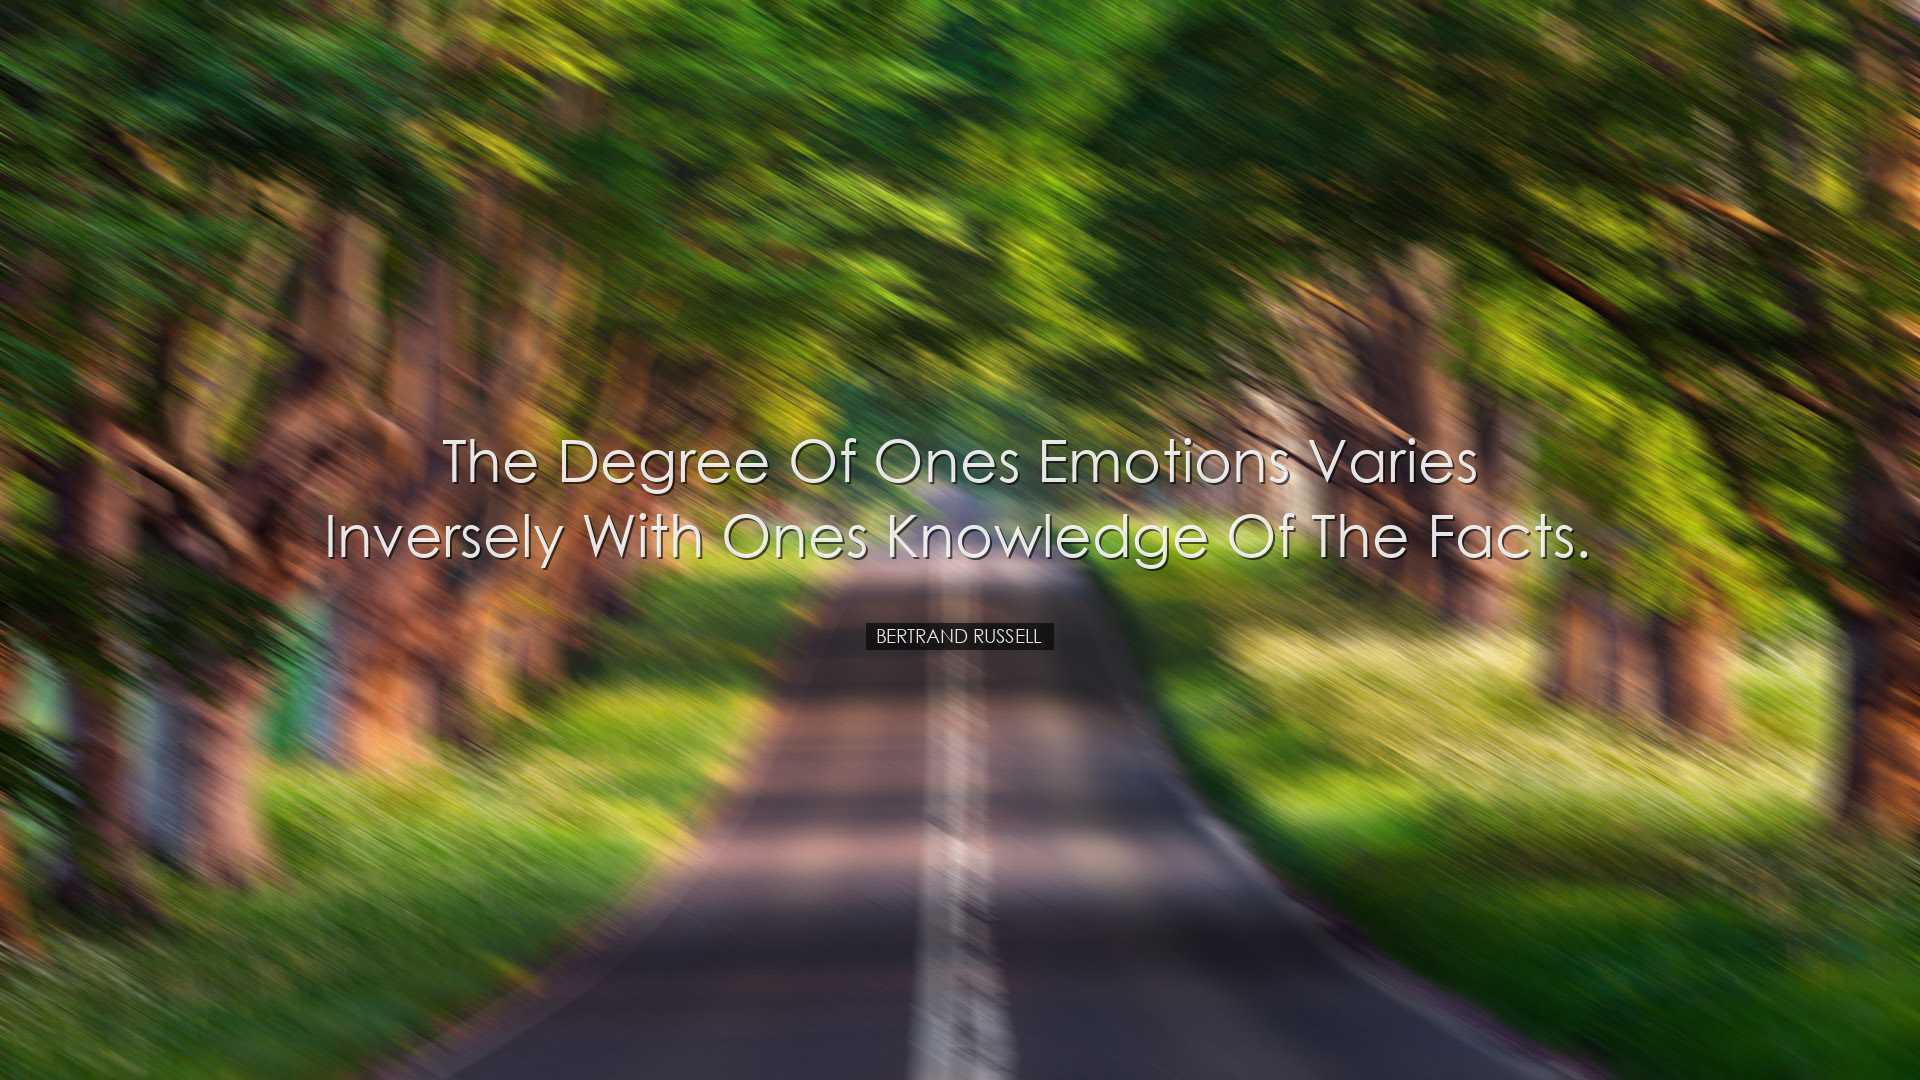 The degree of ones emotions varies inversely with ones knowledge o